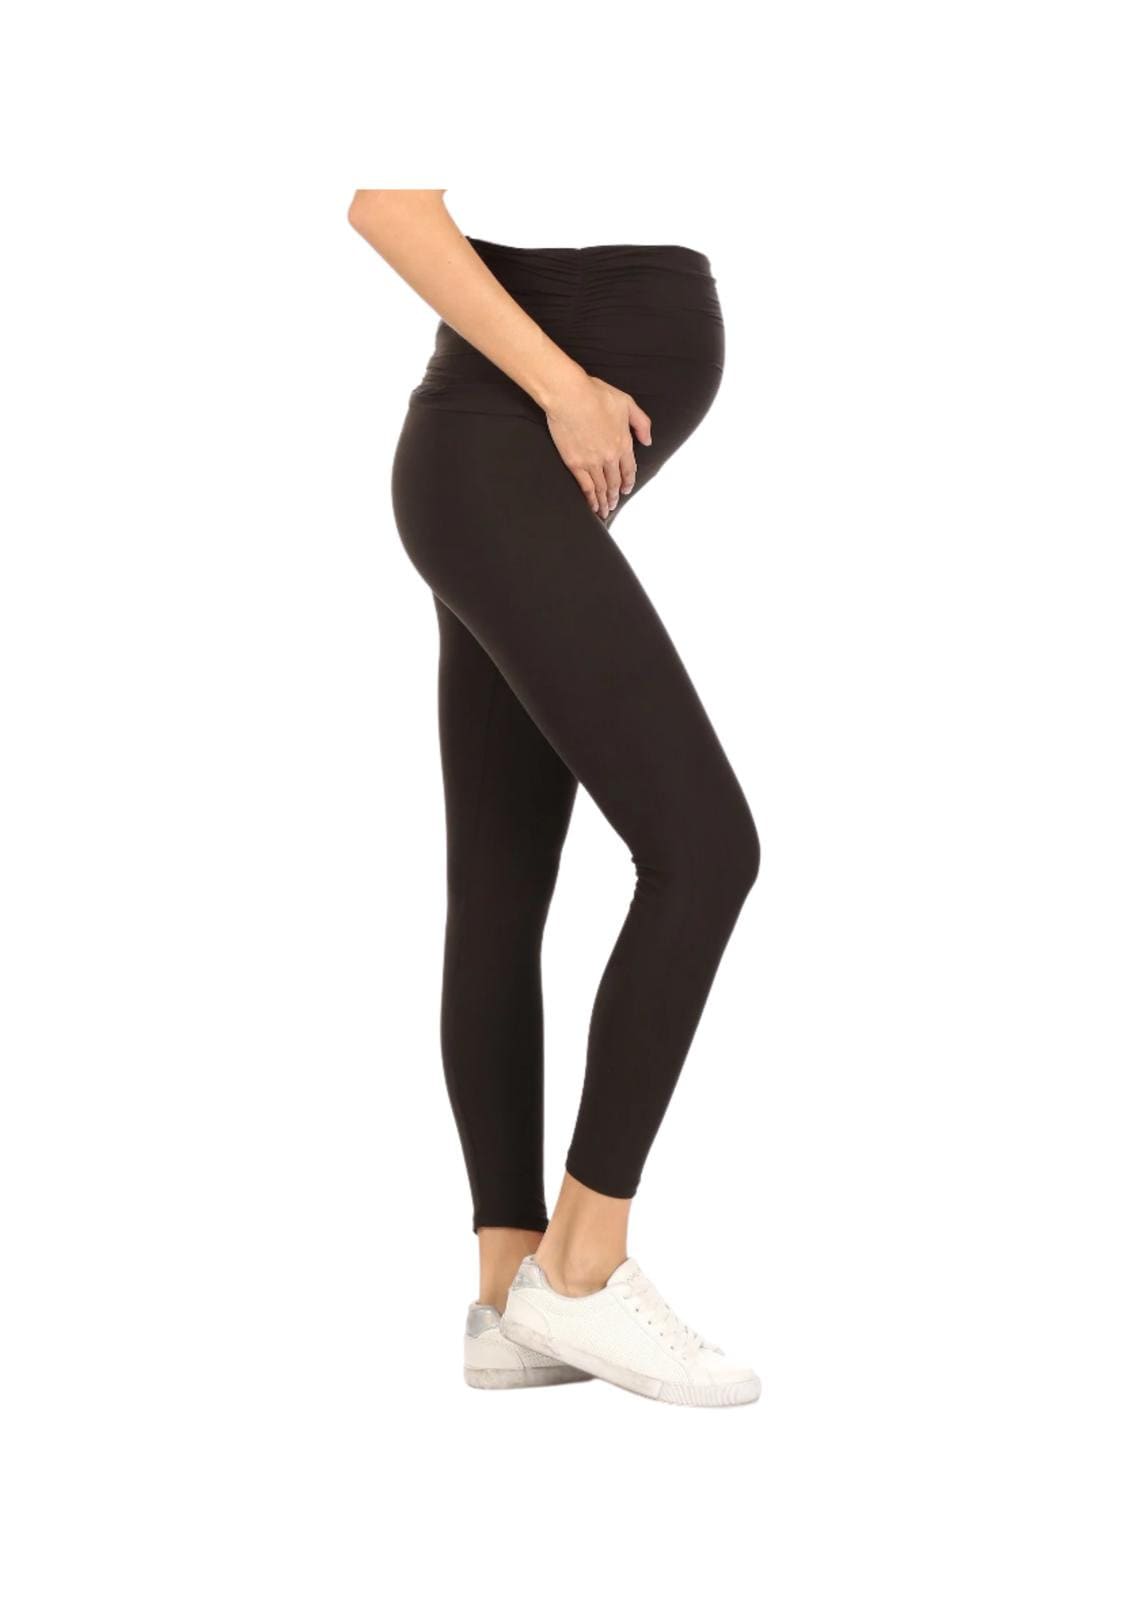 High Waisted Leggings With Pocket / Stretchy Hemp and Organic